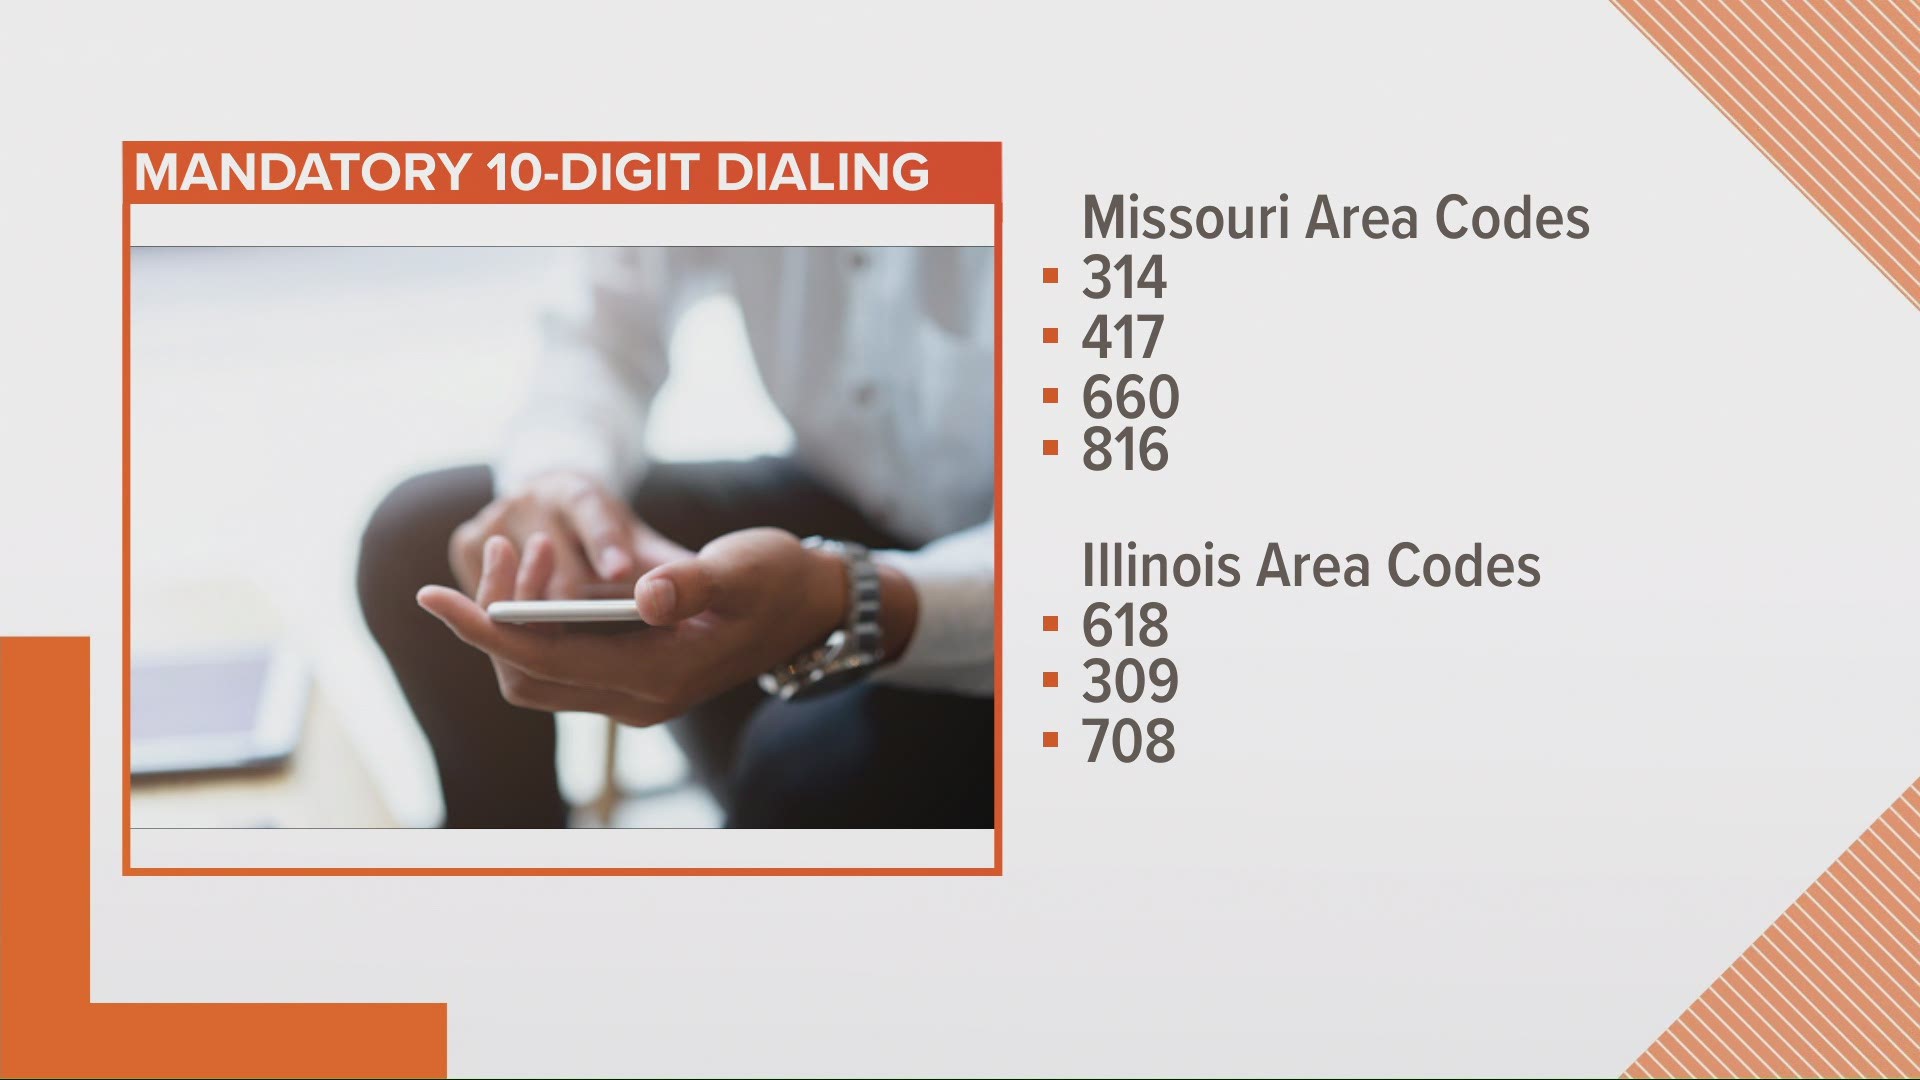 The mandatory 10-digit dialing goes into effect for anyone in the 314 or 618 area codes starting October 24